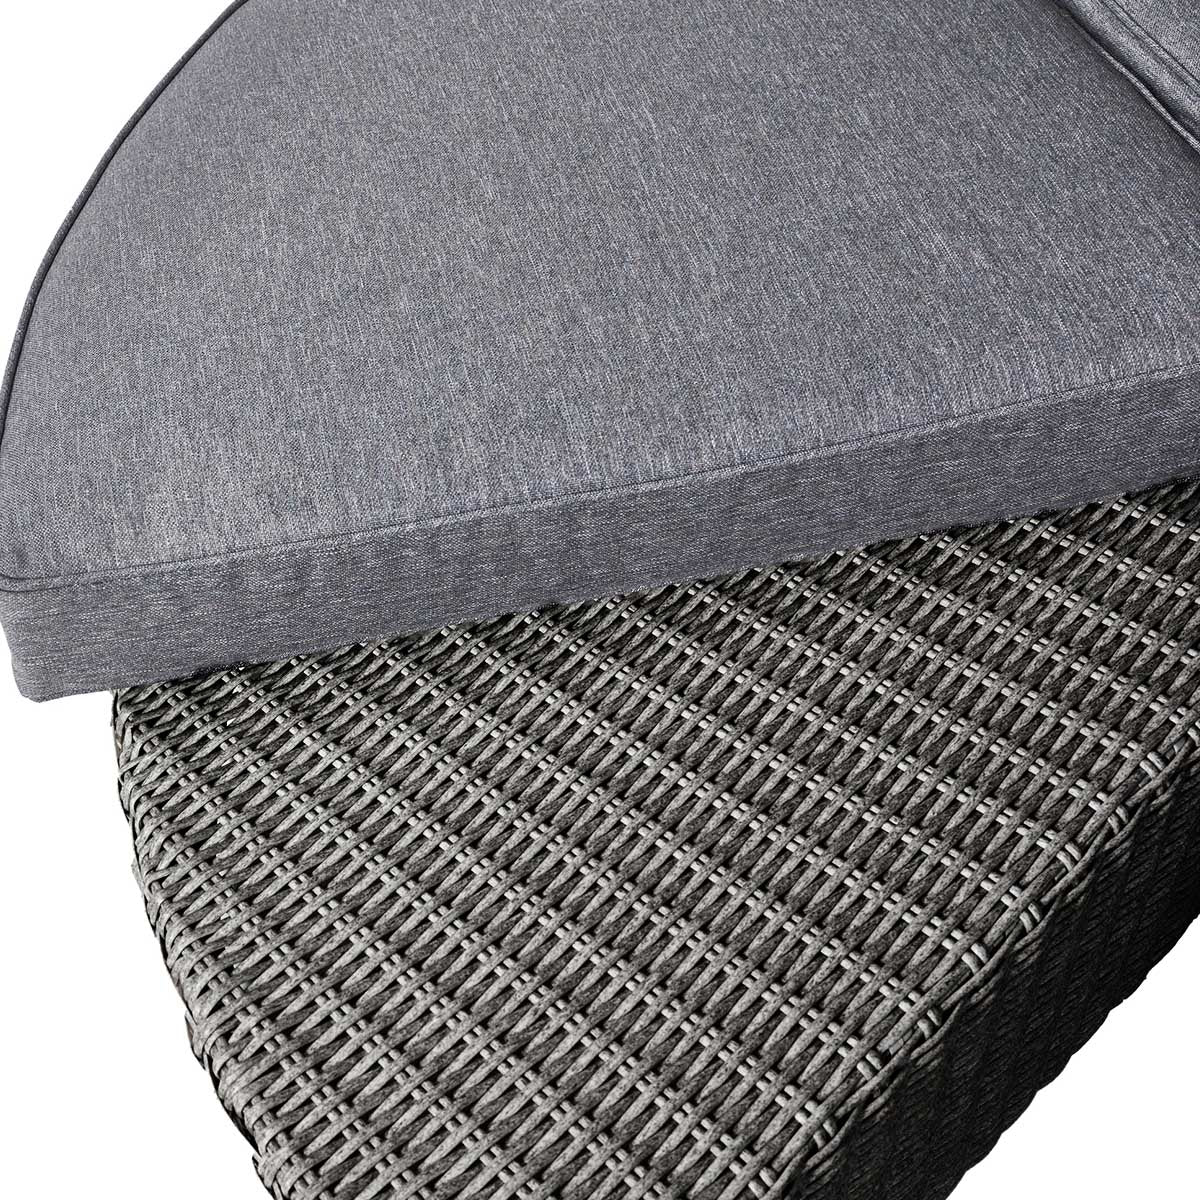 Avalonia Slate Grey Rattan Effect Round Garden Daybed with Canopy – Click Style